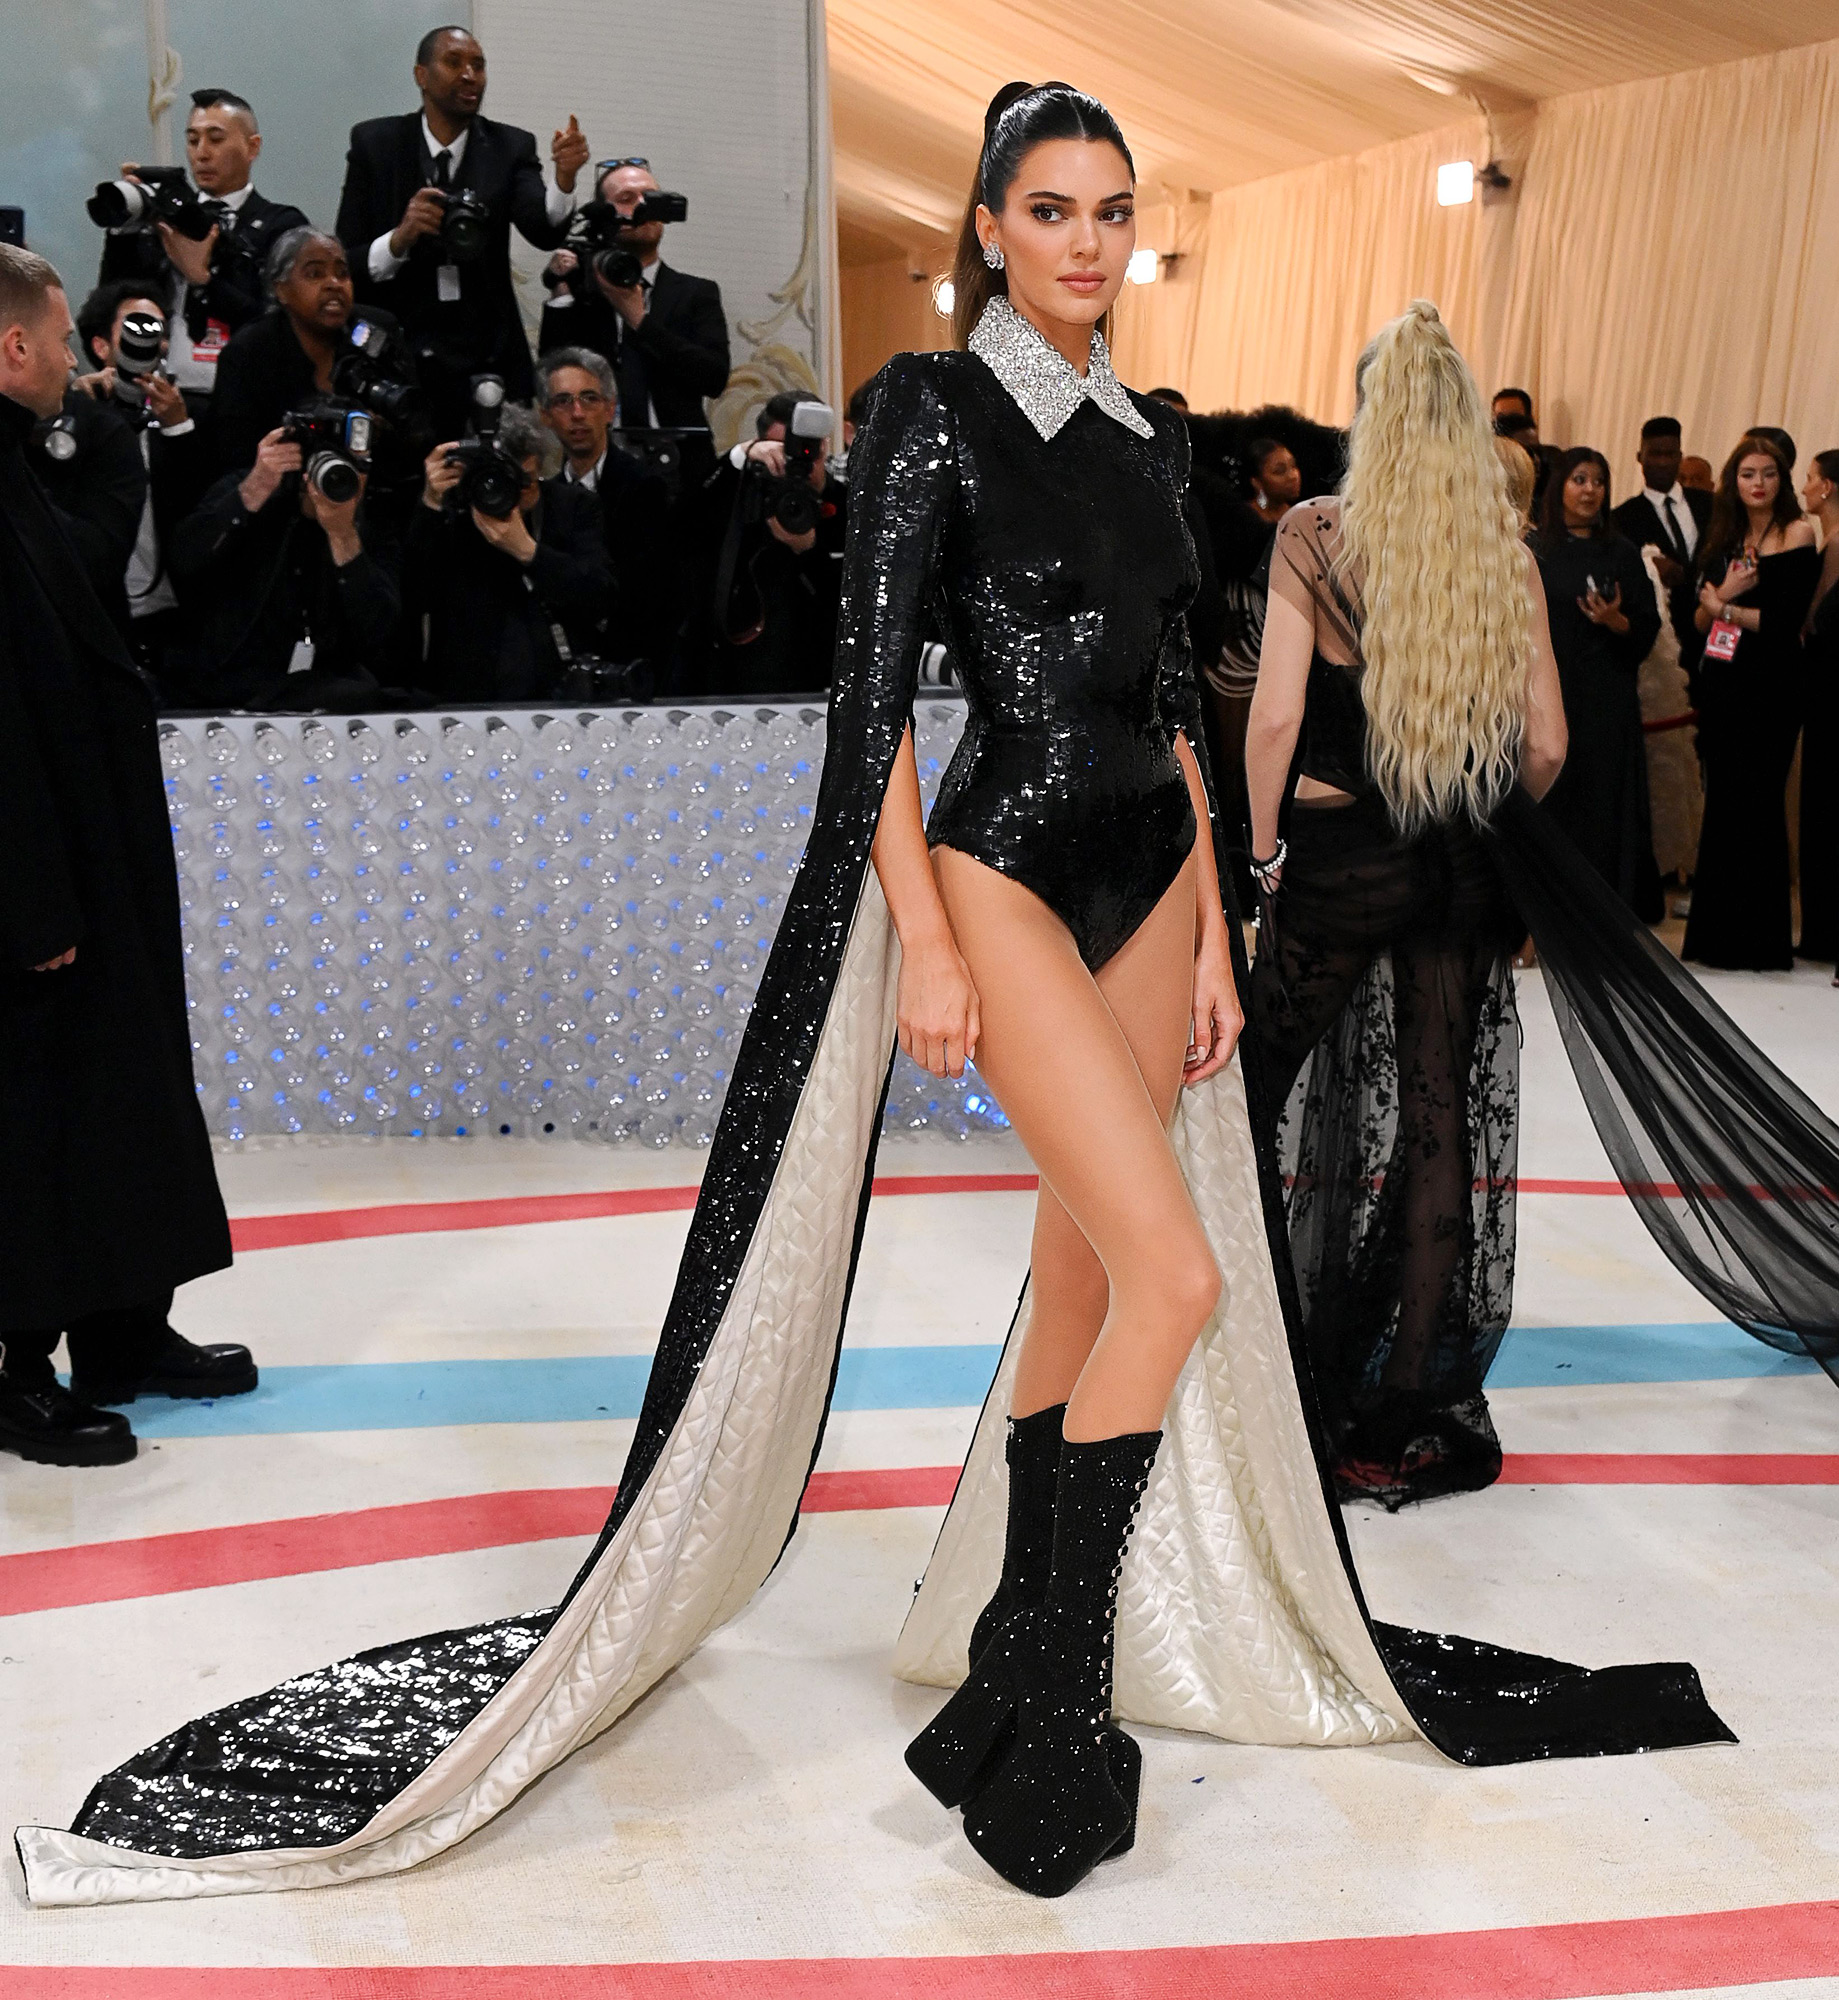 Controversial Outfits Celebrities Have Worn to the Met Gala